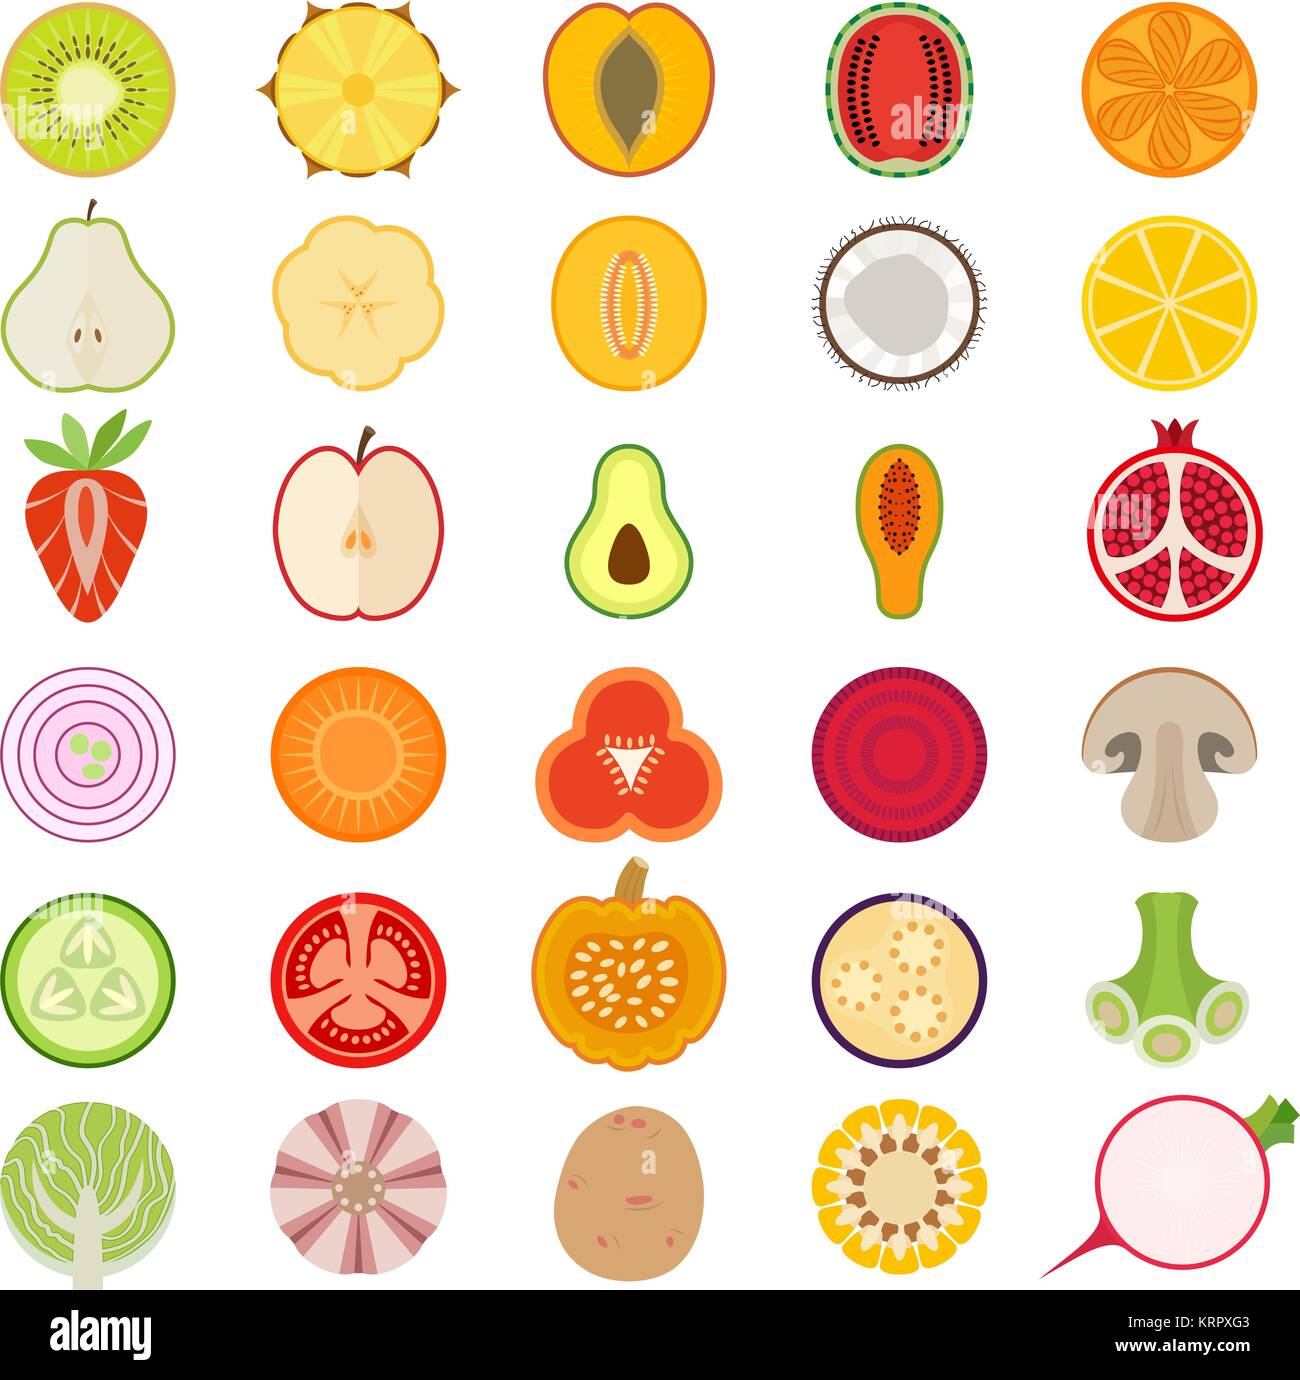 Fruits and vegetables vector collection. Fruits set. Vegetables set. Stock Vector